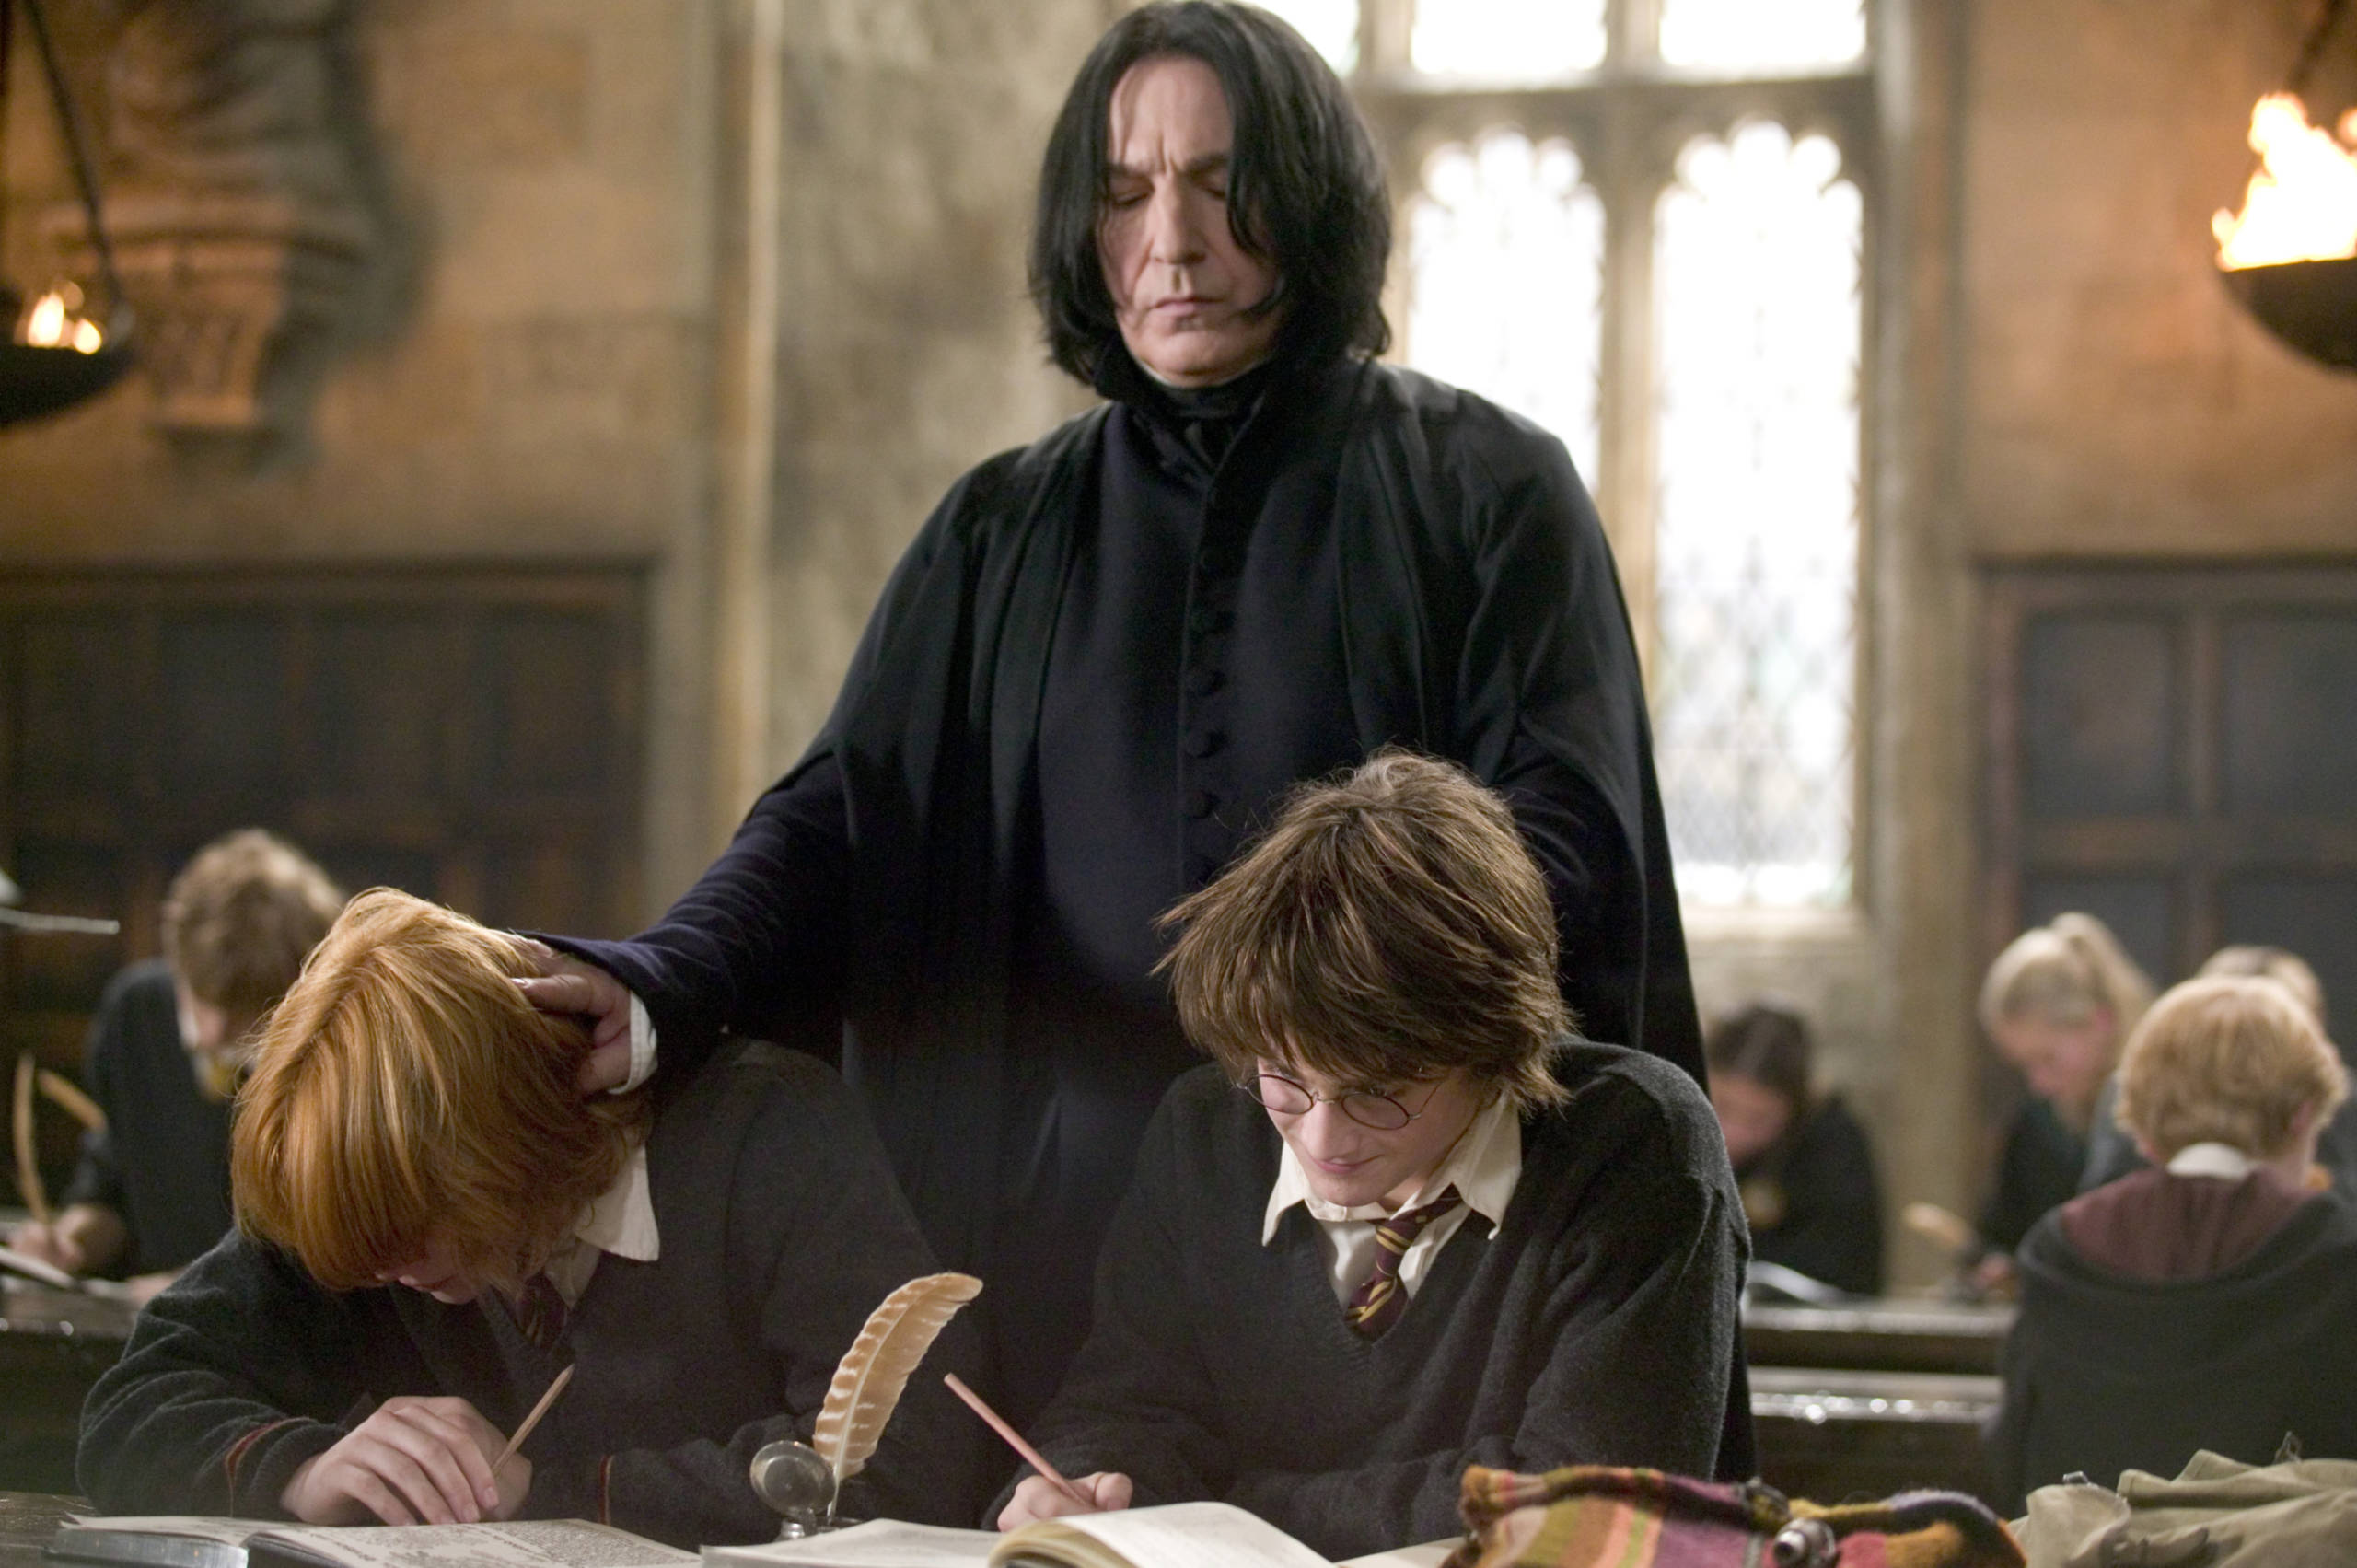 Snape pushes Harry and Ron's heads down in the Goblet of Fire.